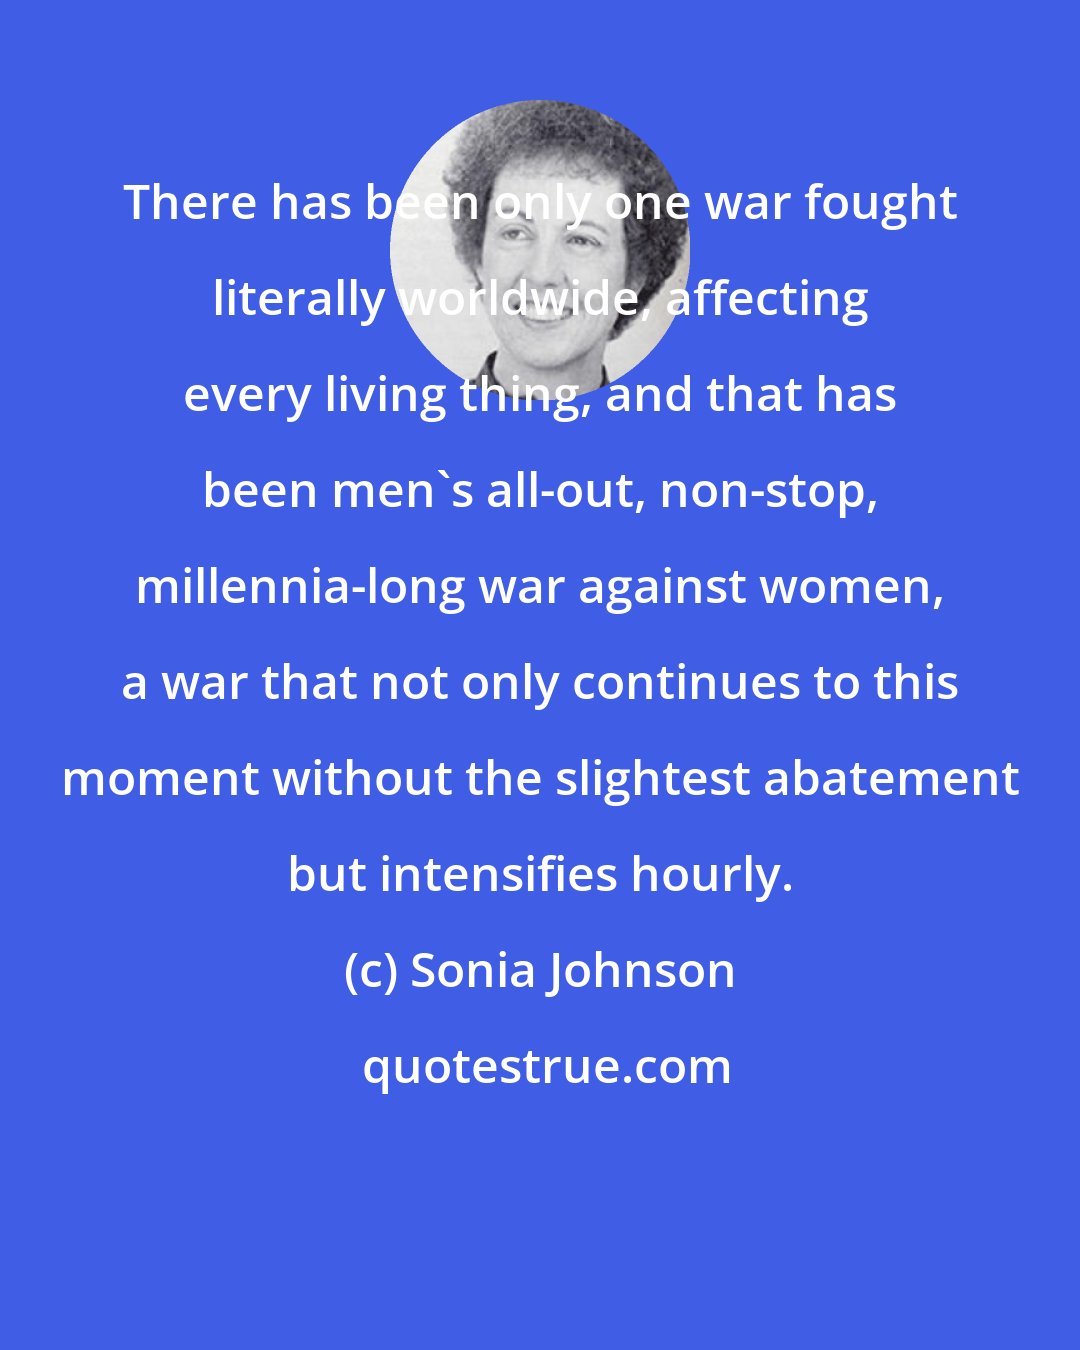 Sonia Johnson: There has been only one war fought literally worldwide, affecting every living thing, and that has been men's all-out, non-stop, millennia-long war against women, a war that not only continues to this moment without the slightest abatement but intensifies hourly.